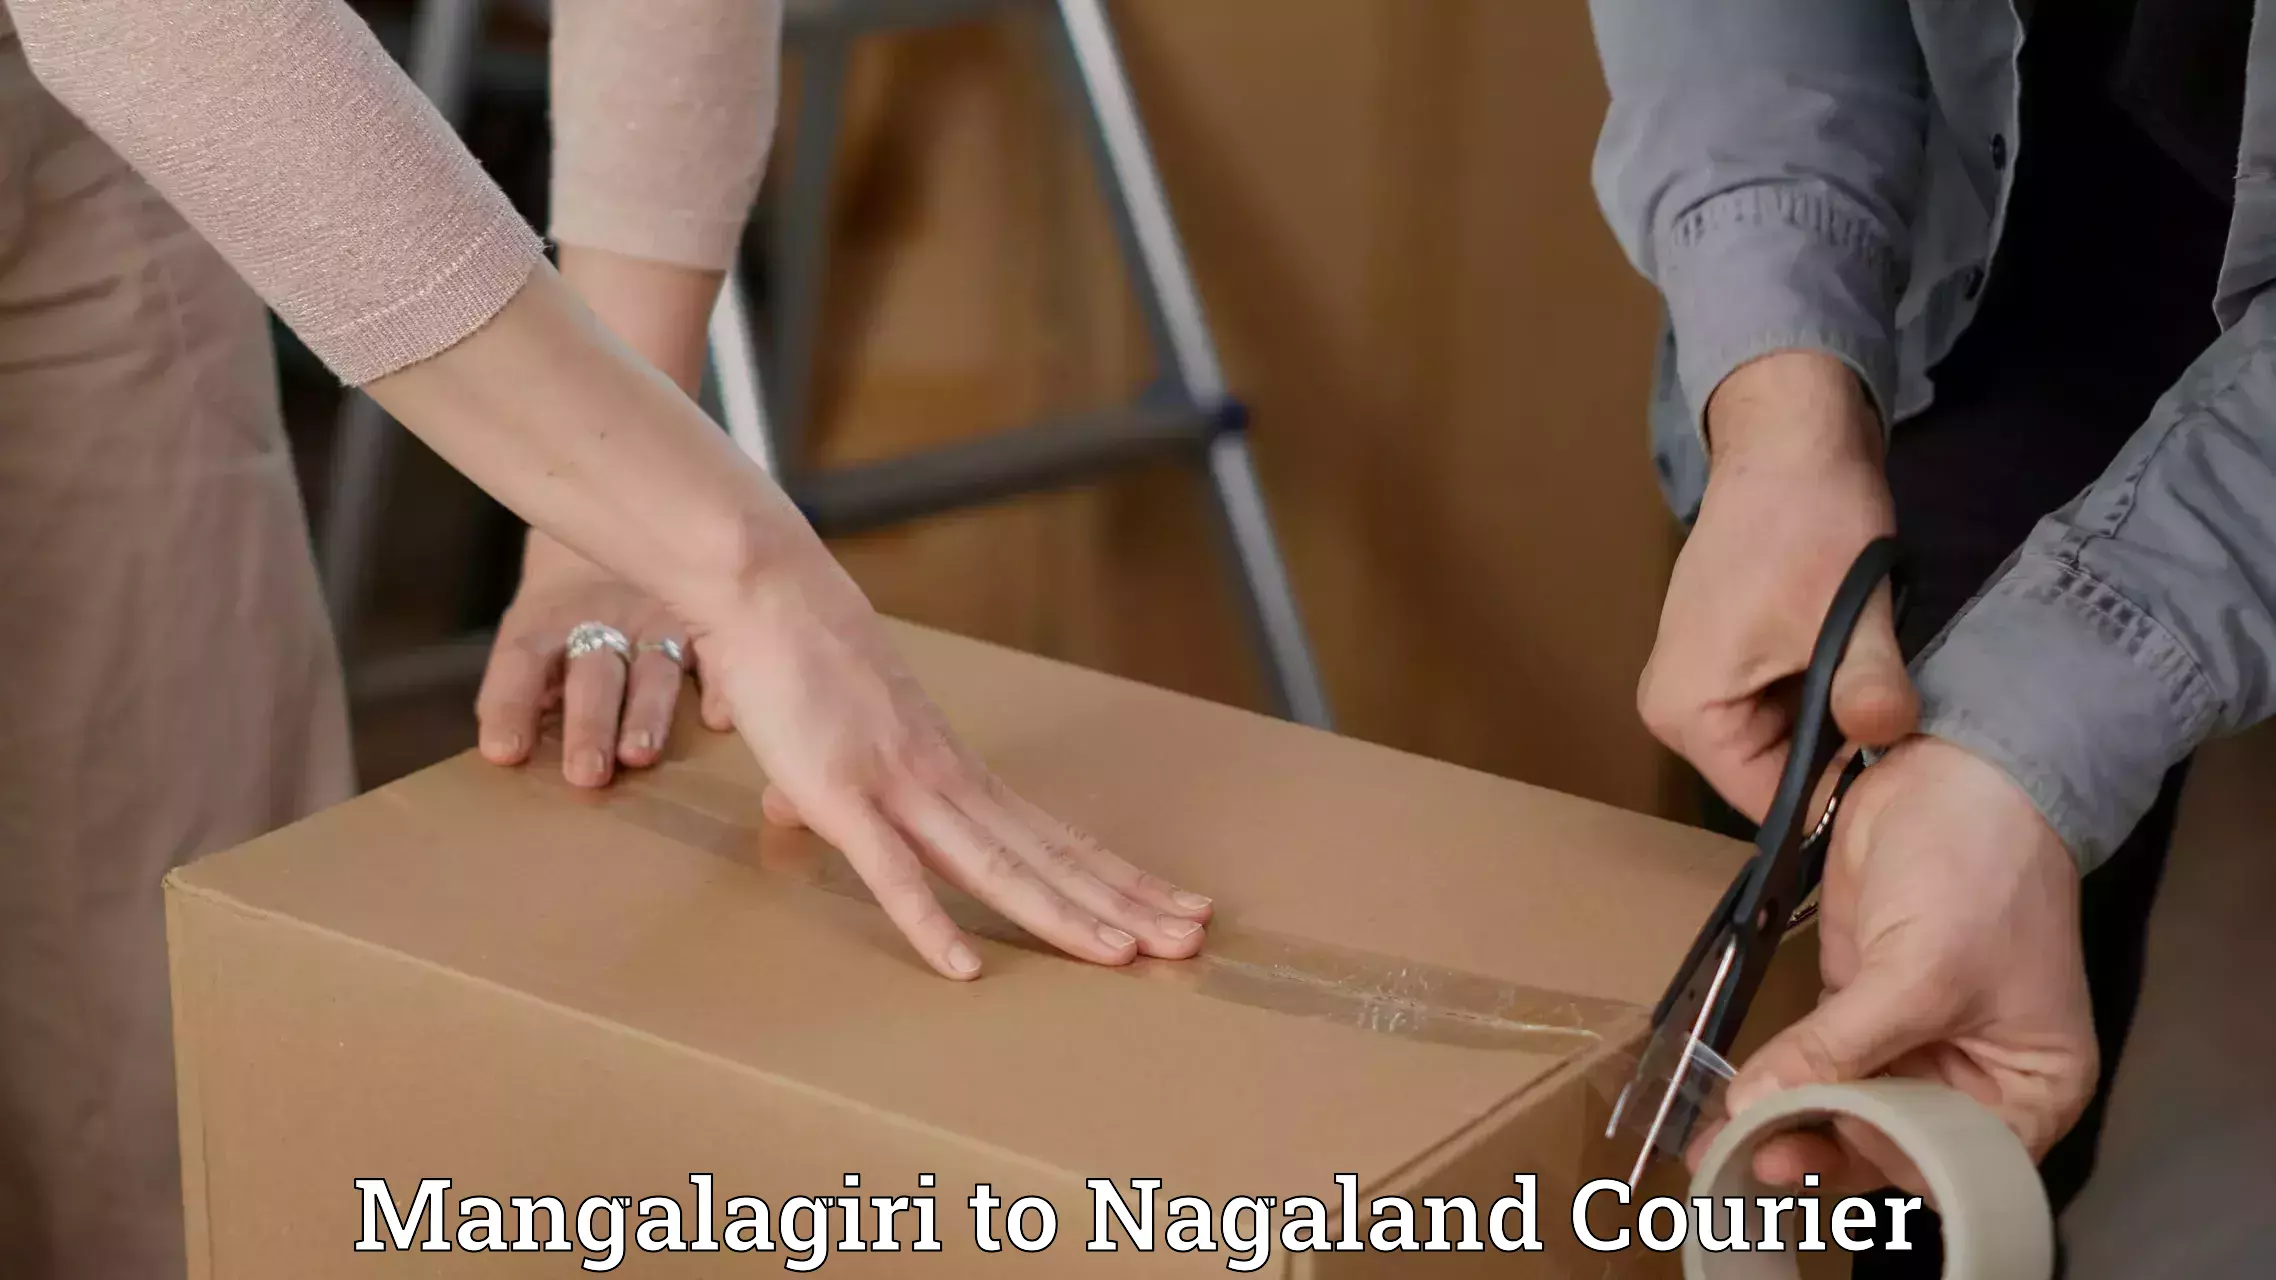 Reliable delivery network Mangalagiri to Nagaland